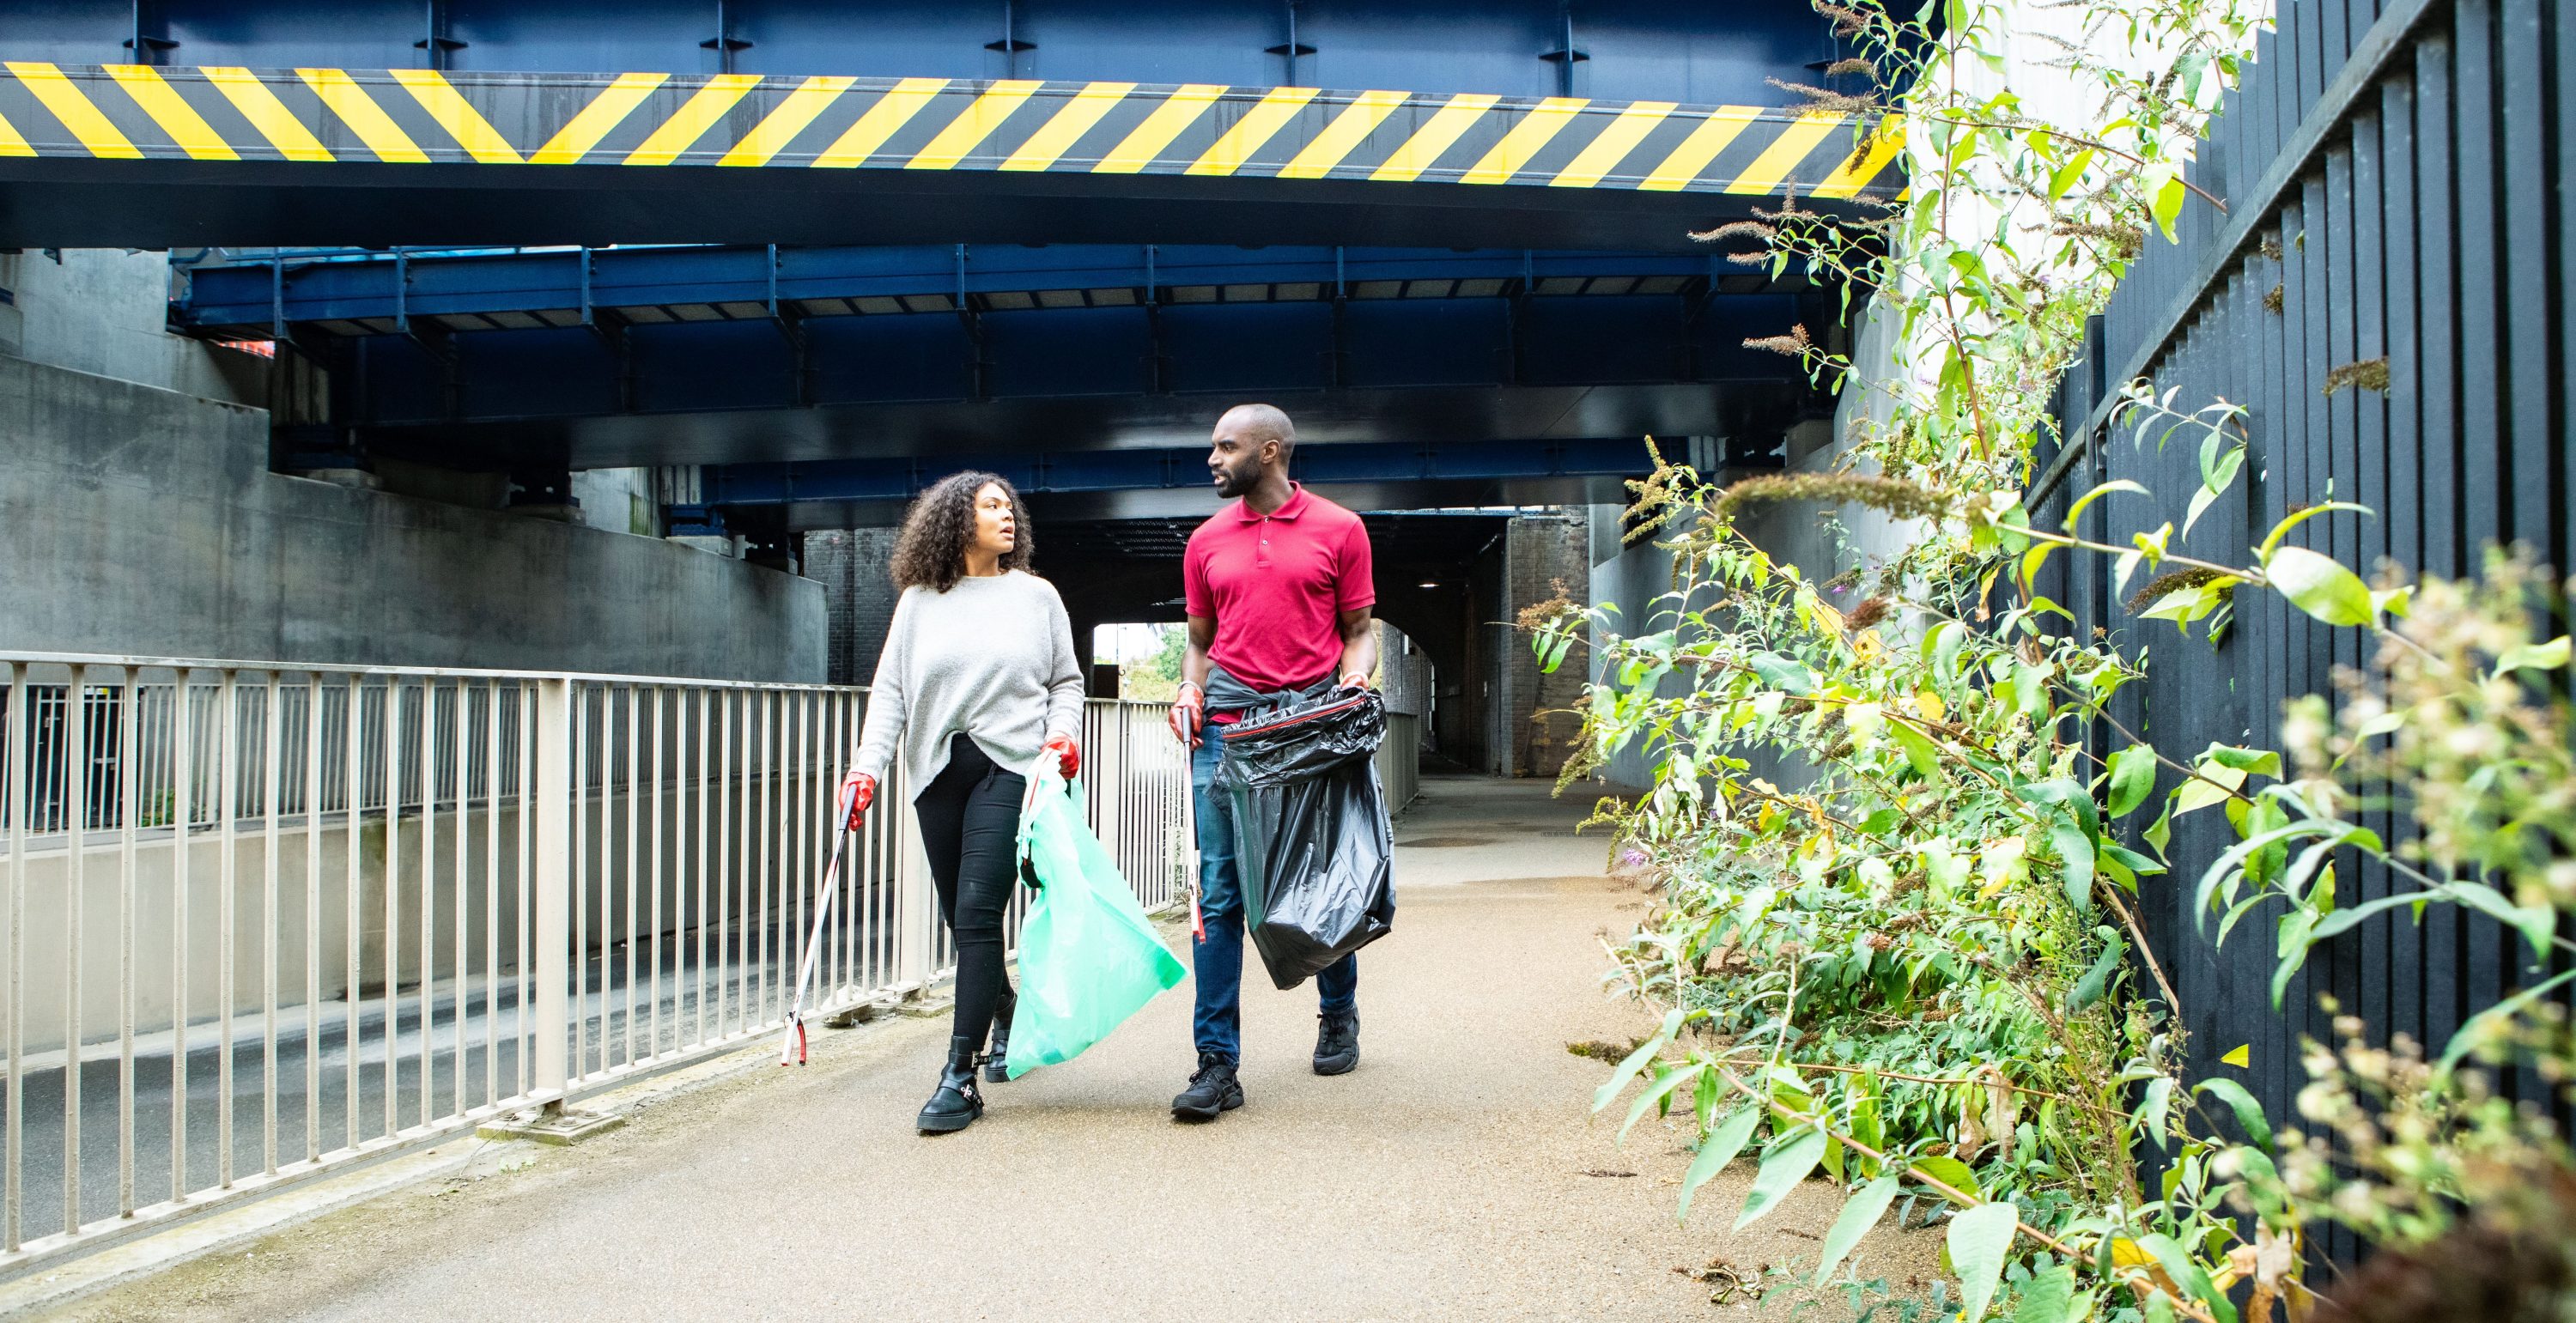 Man and woman walking under bridge with litter picking equipment